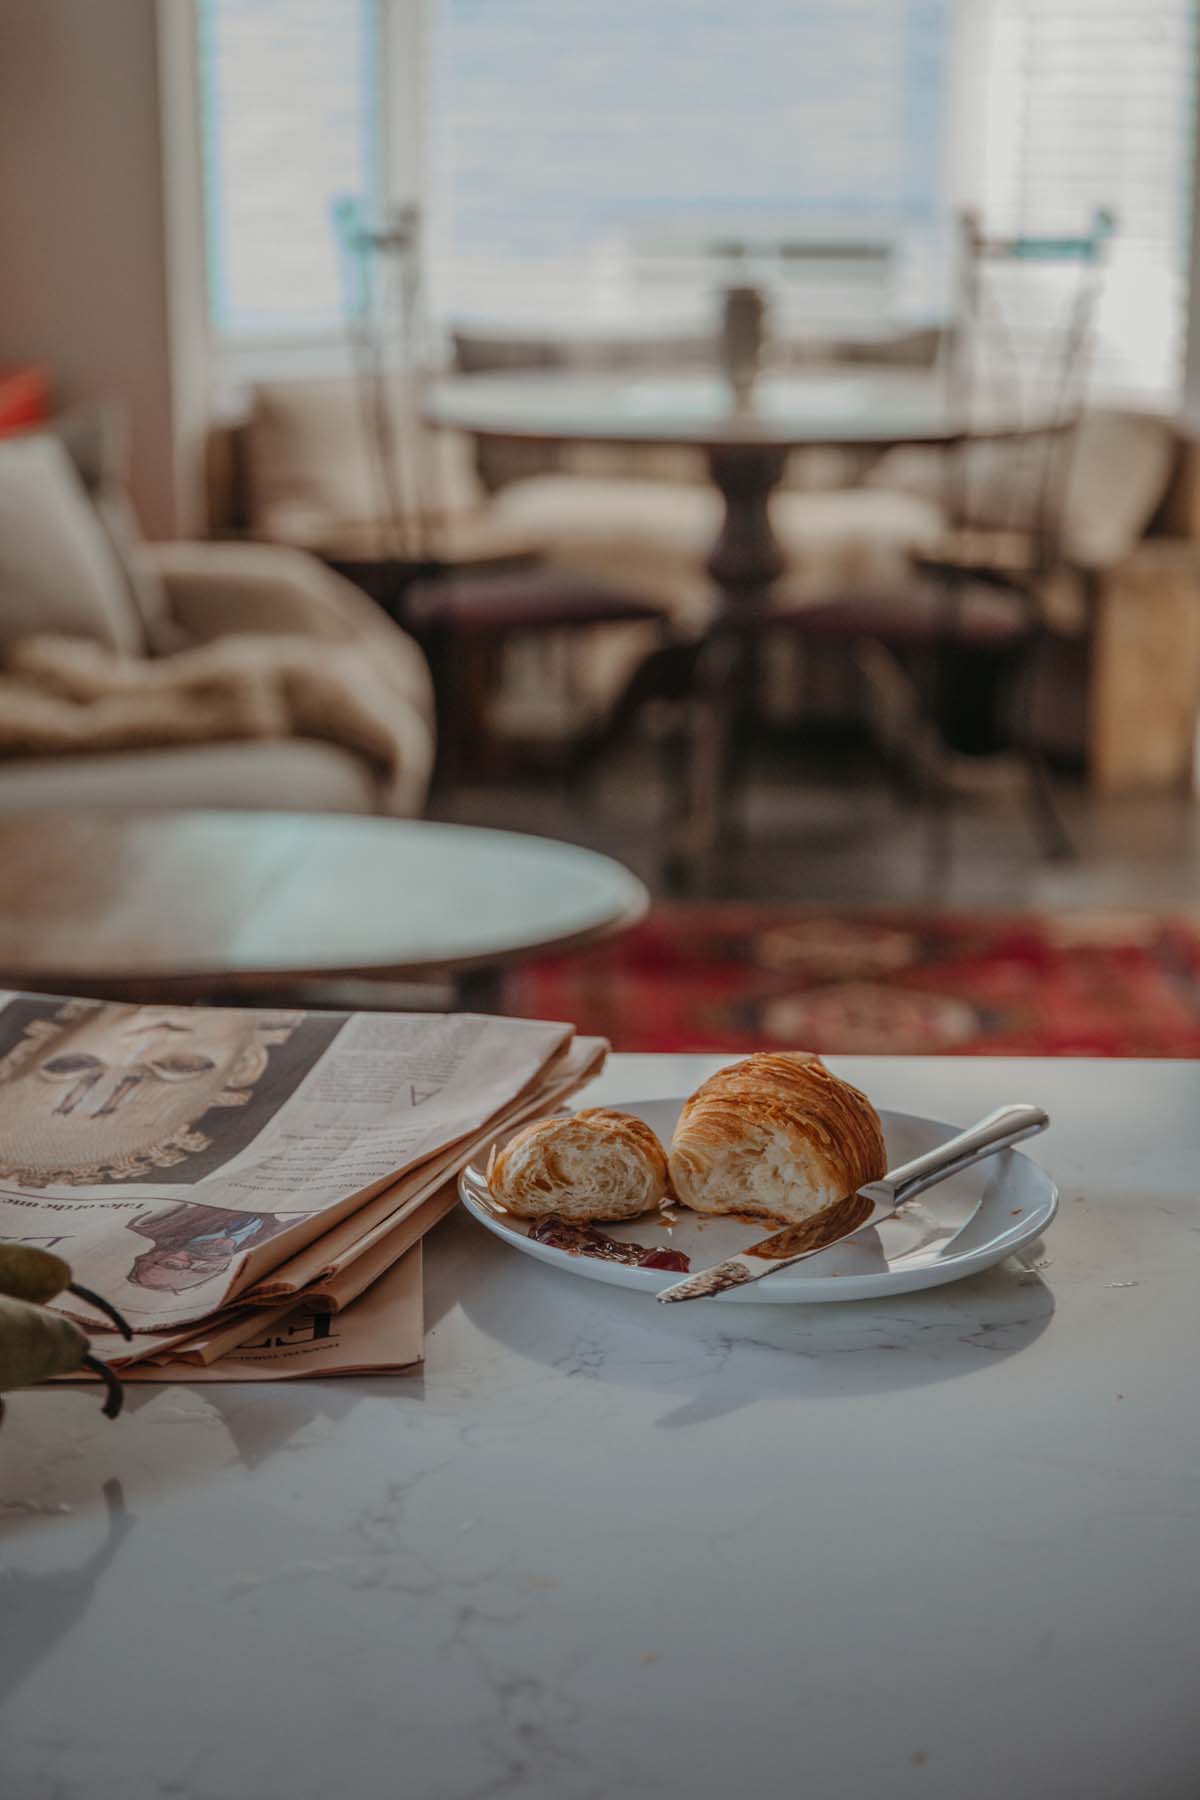 Croissant and newspapers on the kitchen counter